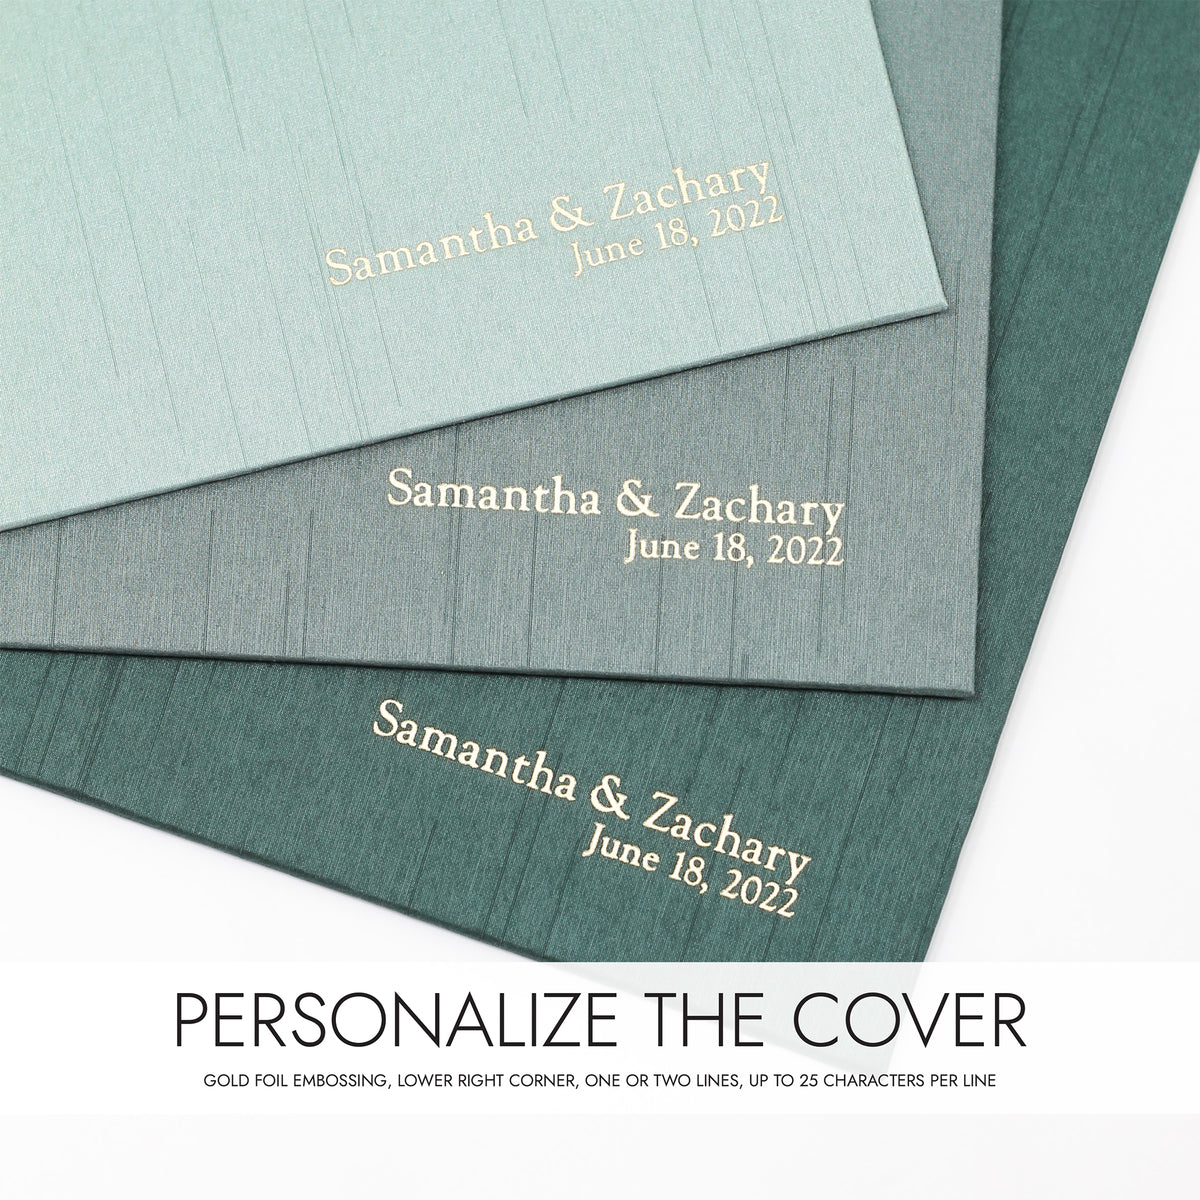 Event Guestbook Embossed with “Guests” | Cover: Amethyst Silk | Available Personalized